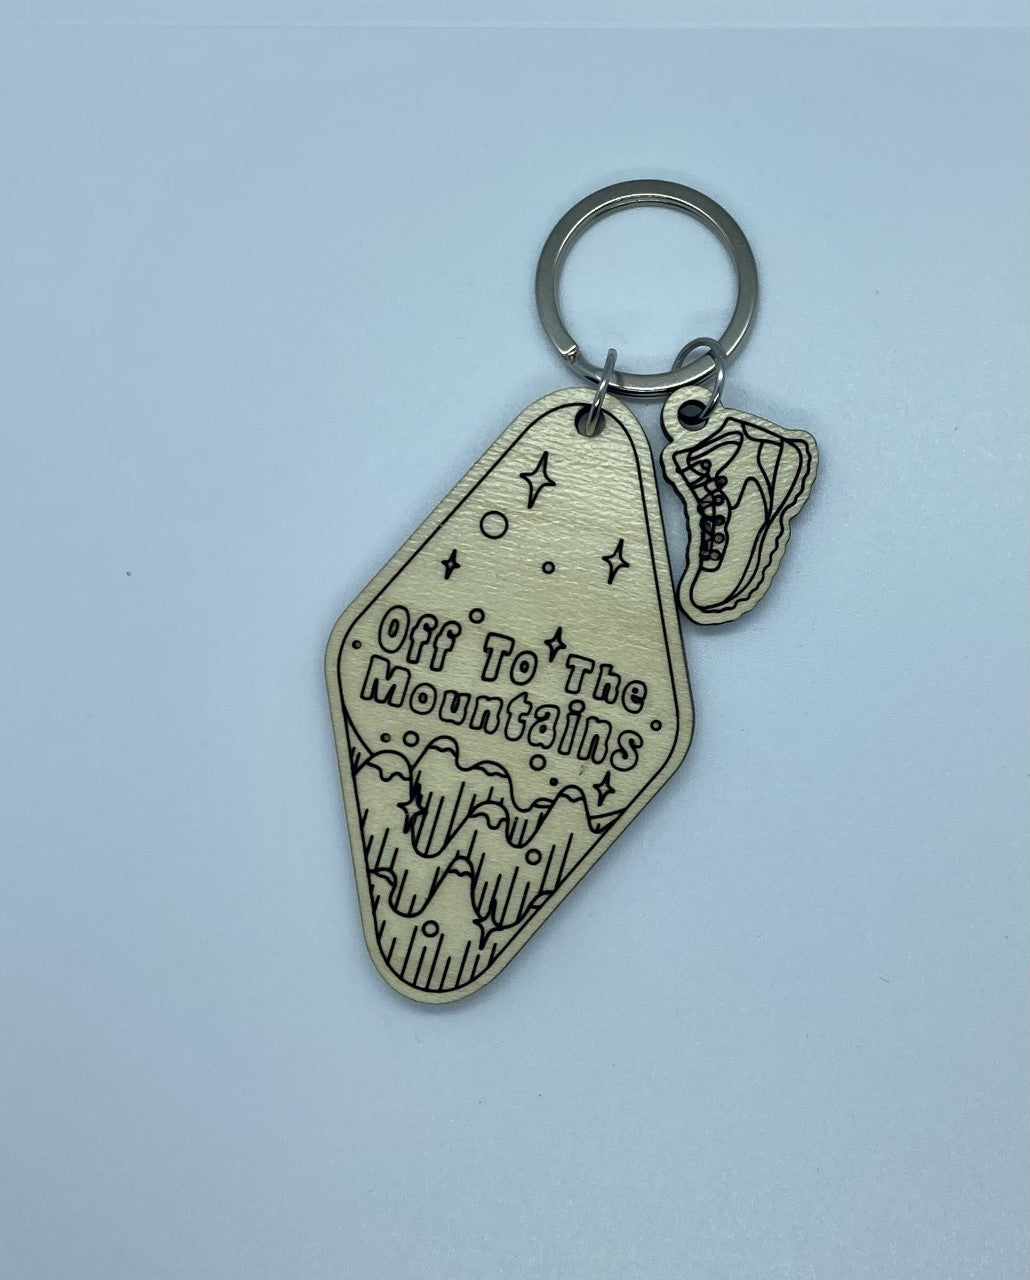 Off To The Mountains Keychain